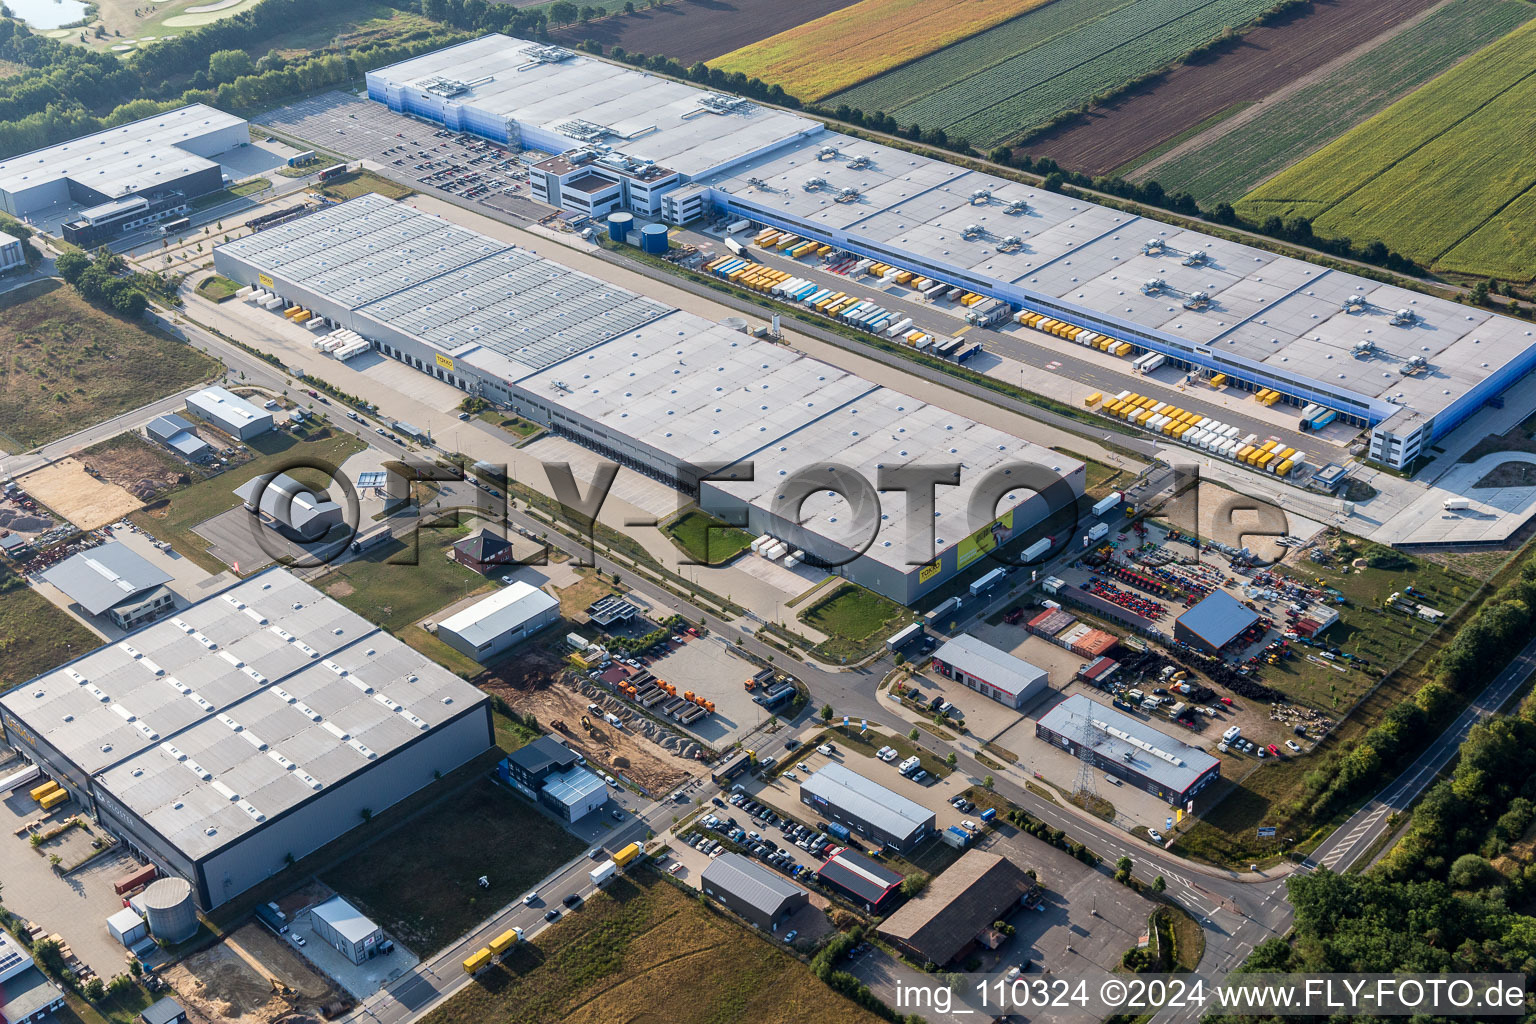 Aerial photograpy of Building complex and grounds of the logistics center Amazon Logistik Winsen GmbH - HAM2 in Winsen (Luhe) in the state Lower Saxony, Germany